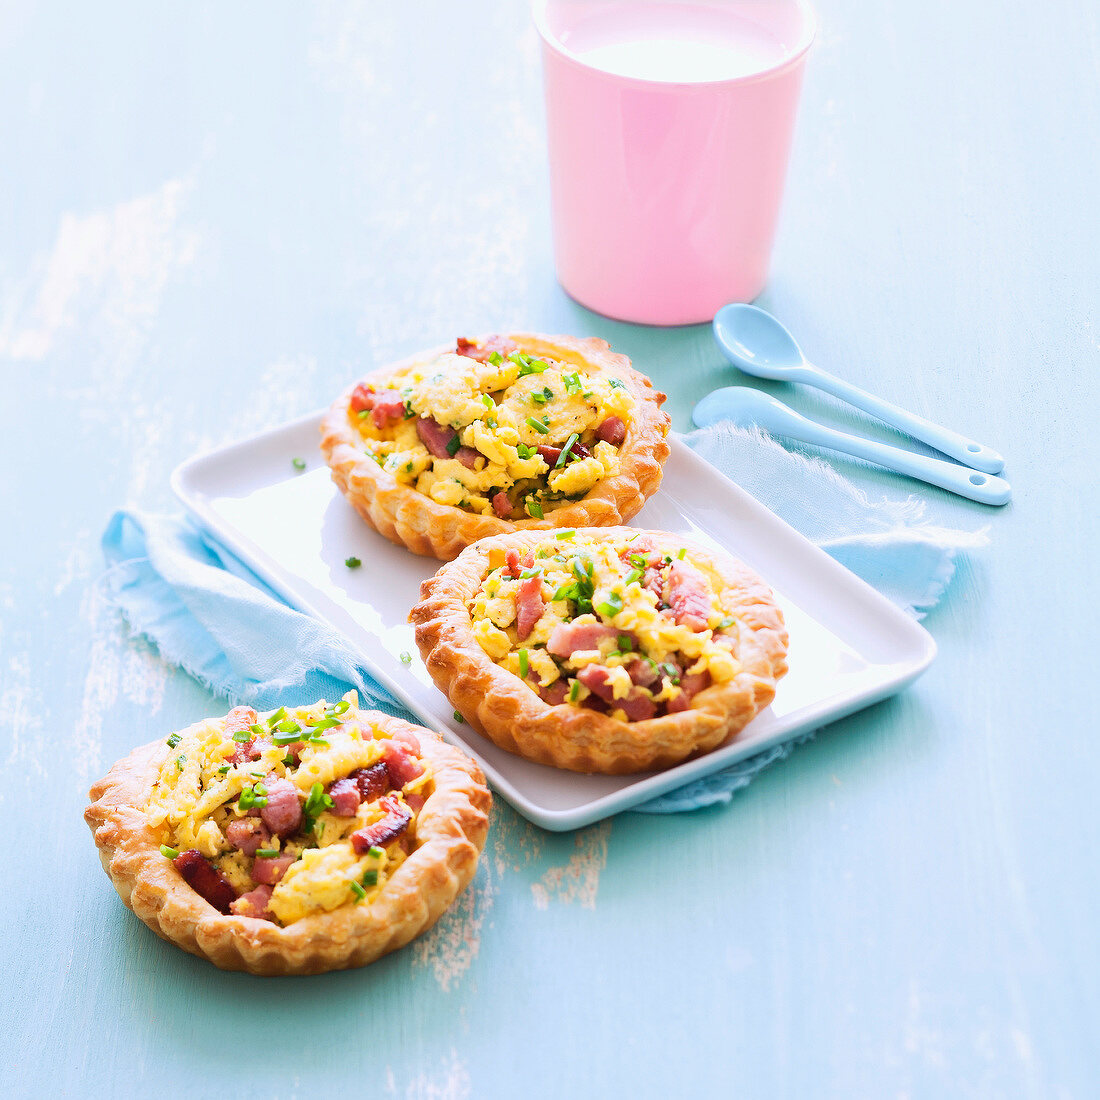 Scrambled egg and diced bacon tartlets